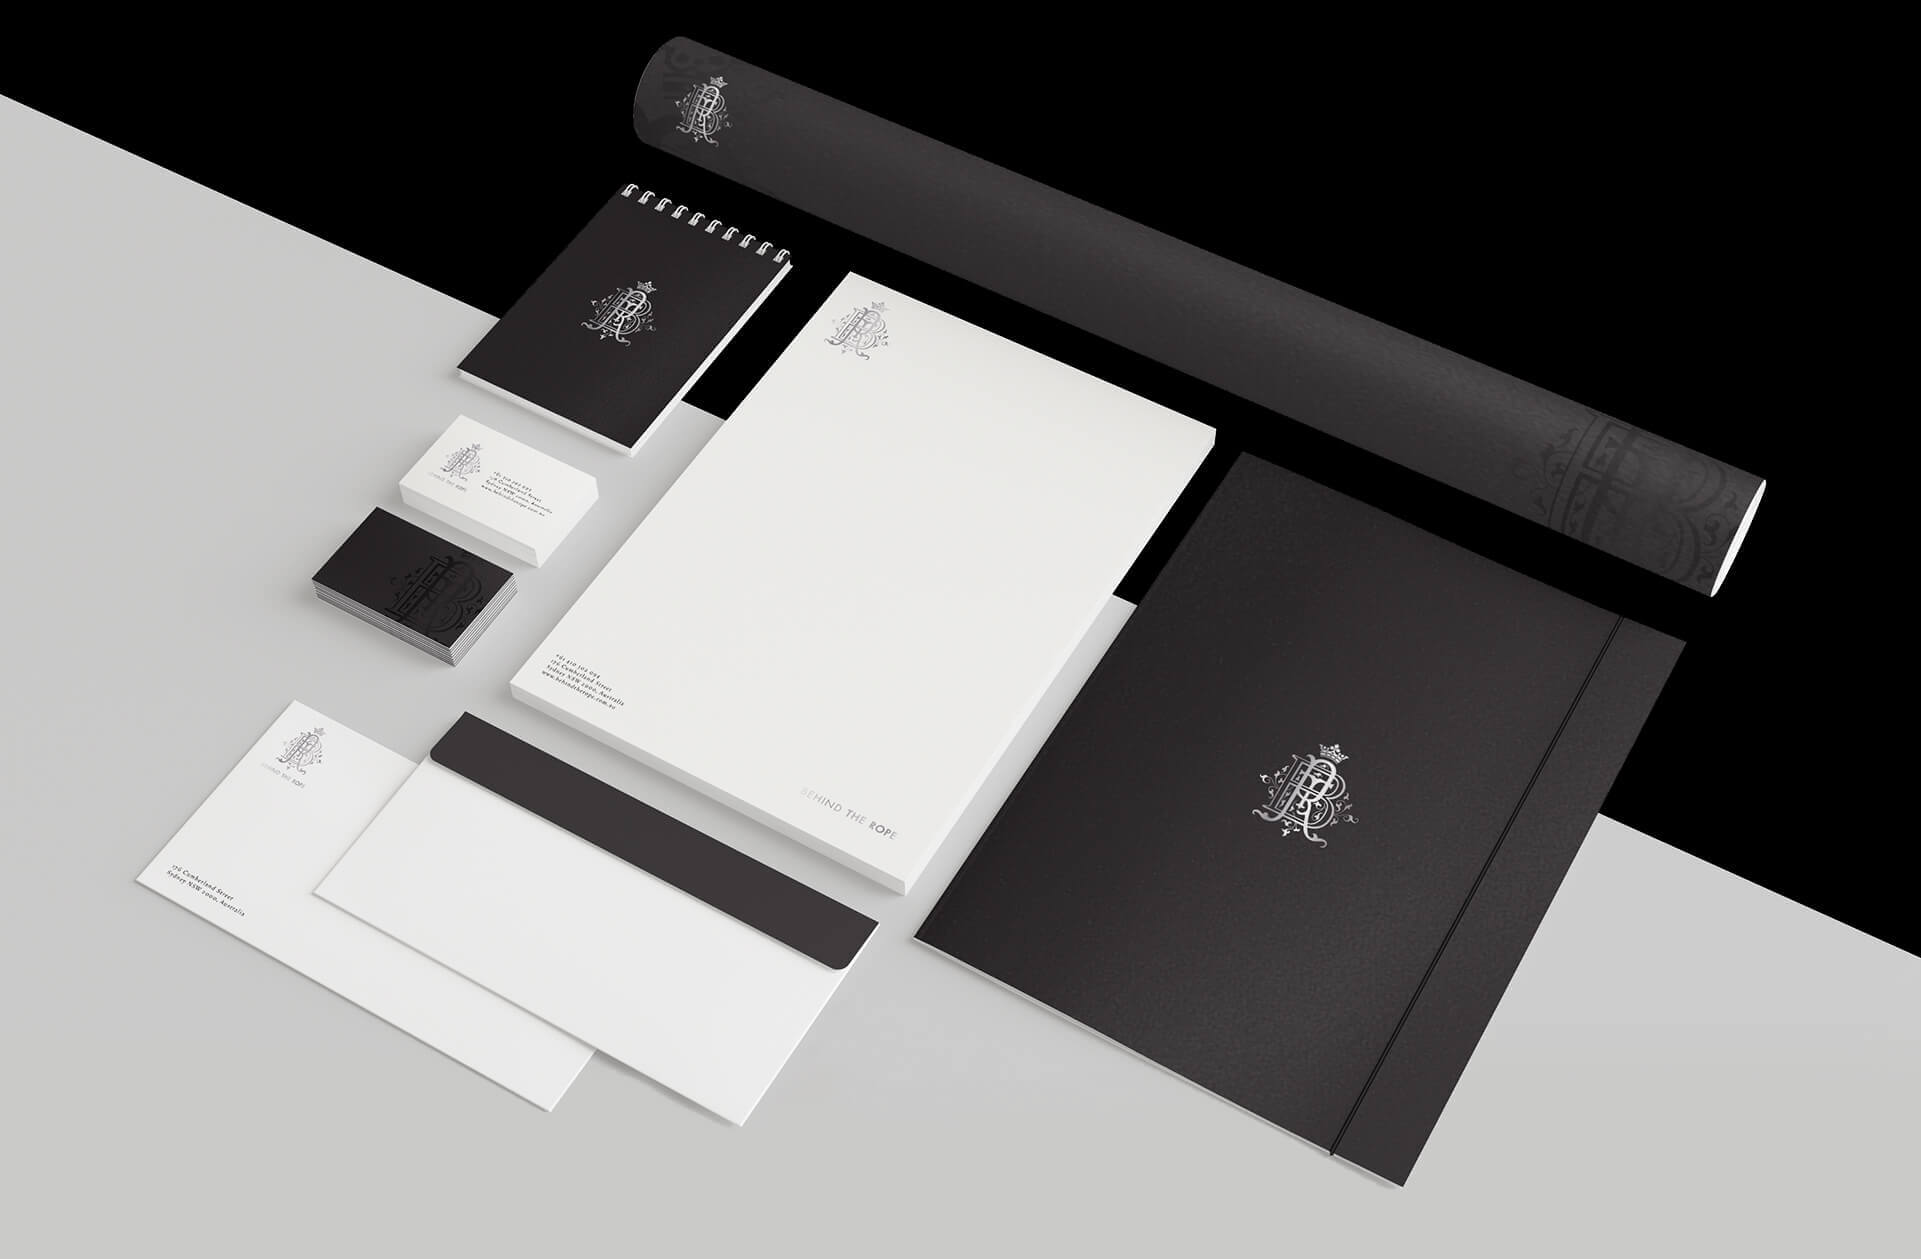 Branded stationery for a lifestyle company